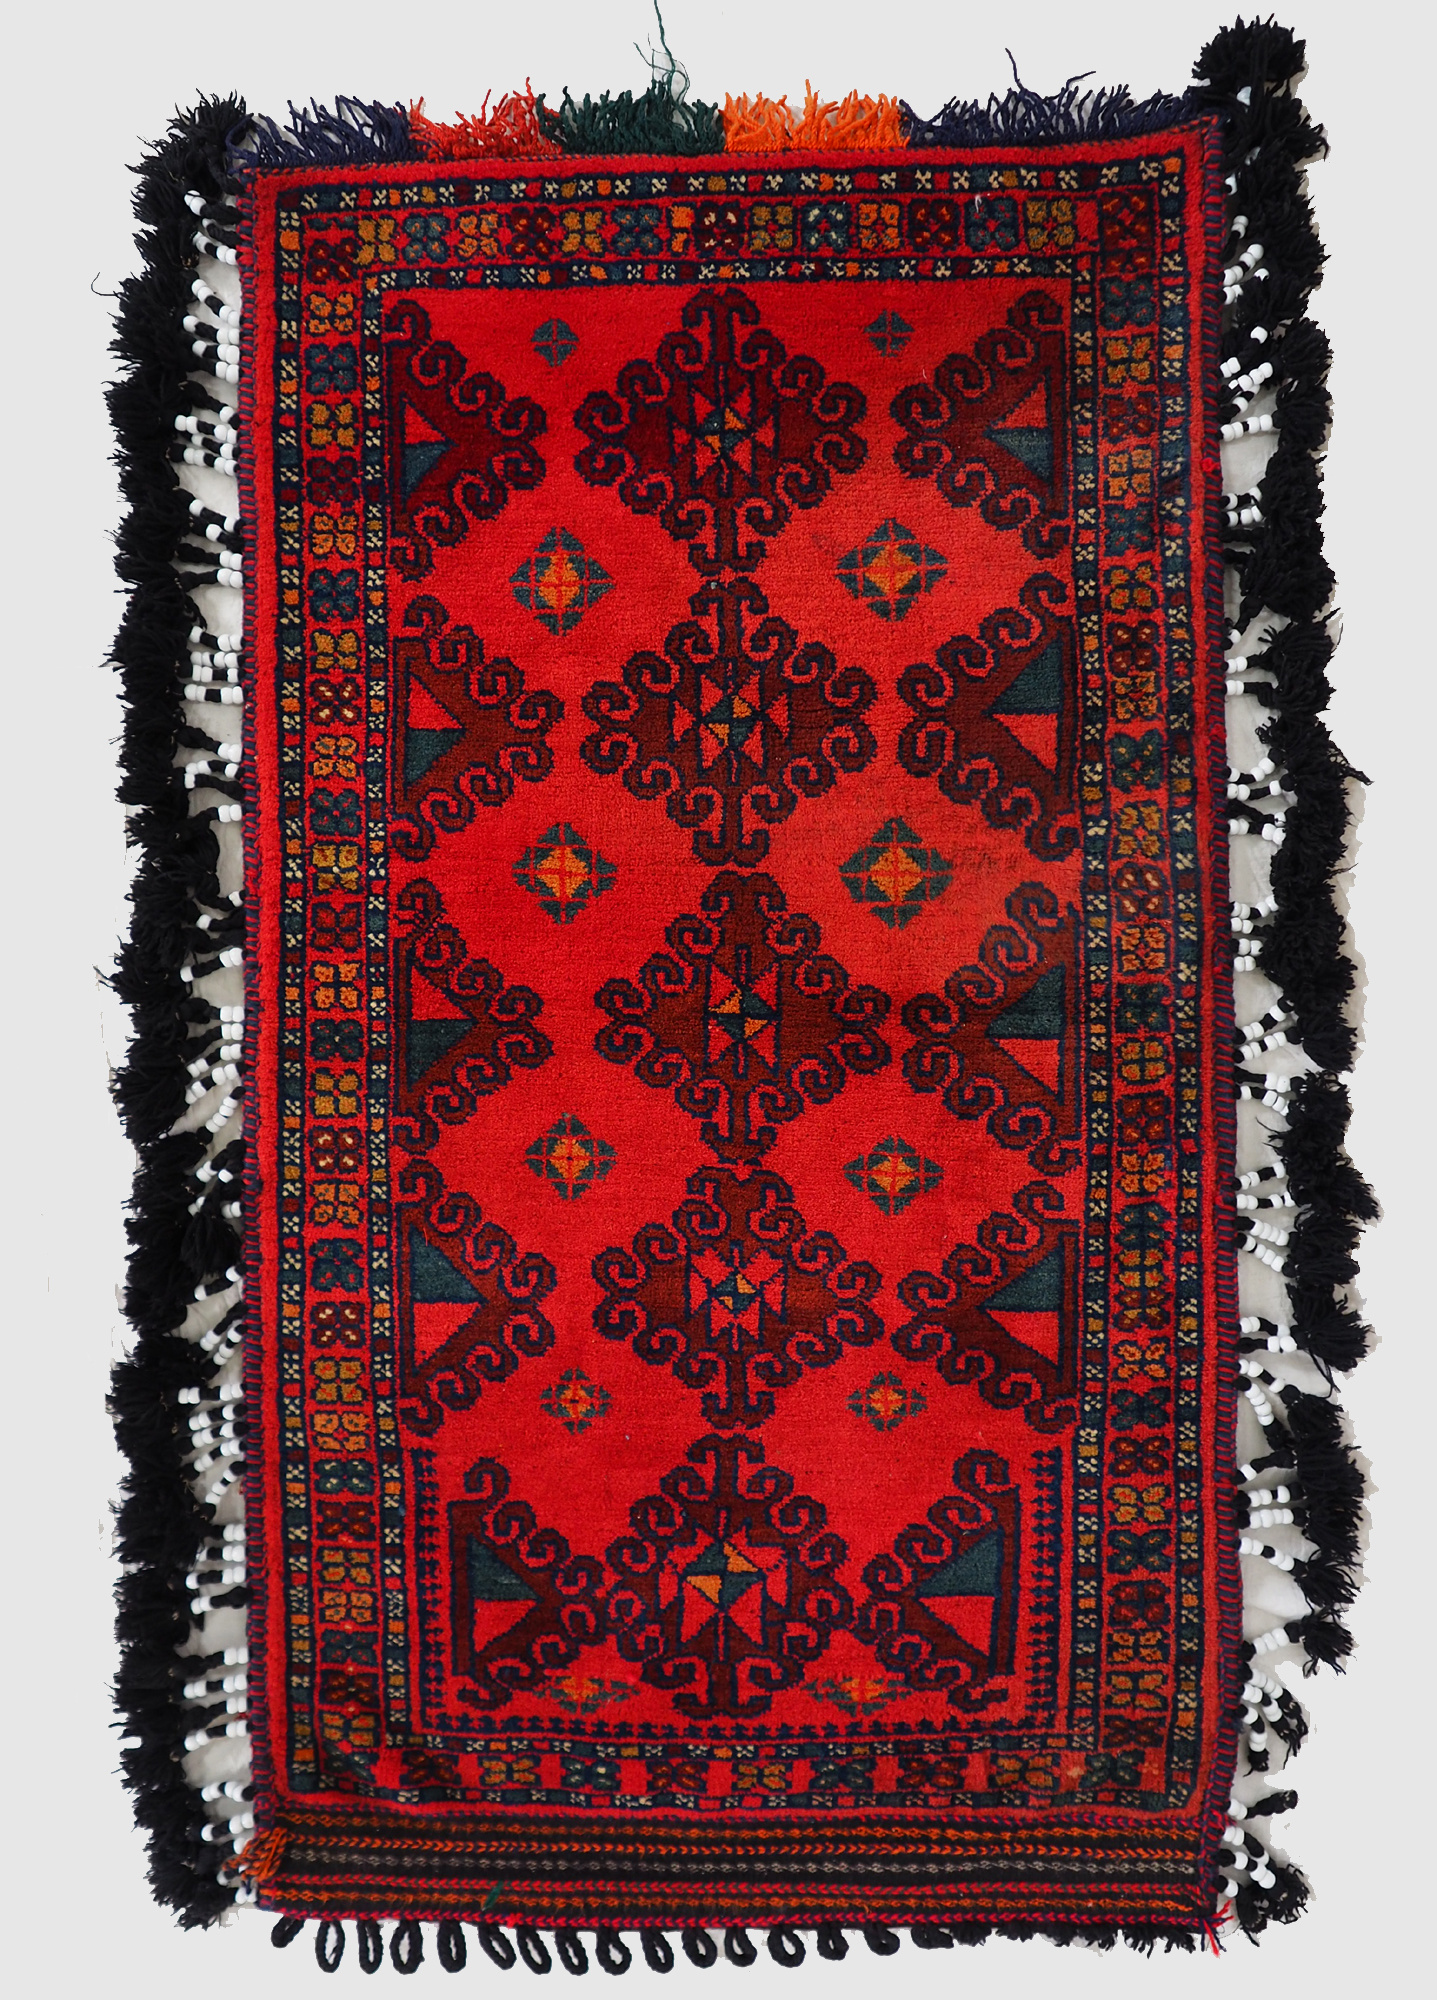 antique orient  Afghan Beloch nomad rug seat floor cushion Bohemian pillow 1001 night No:19/297